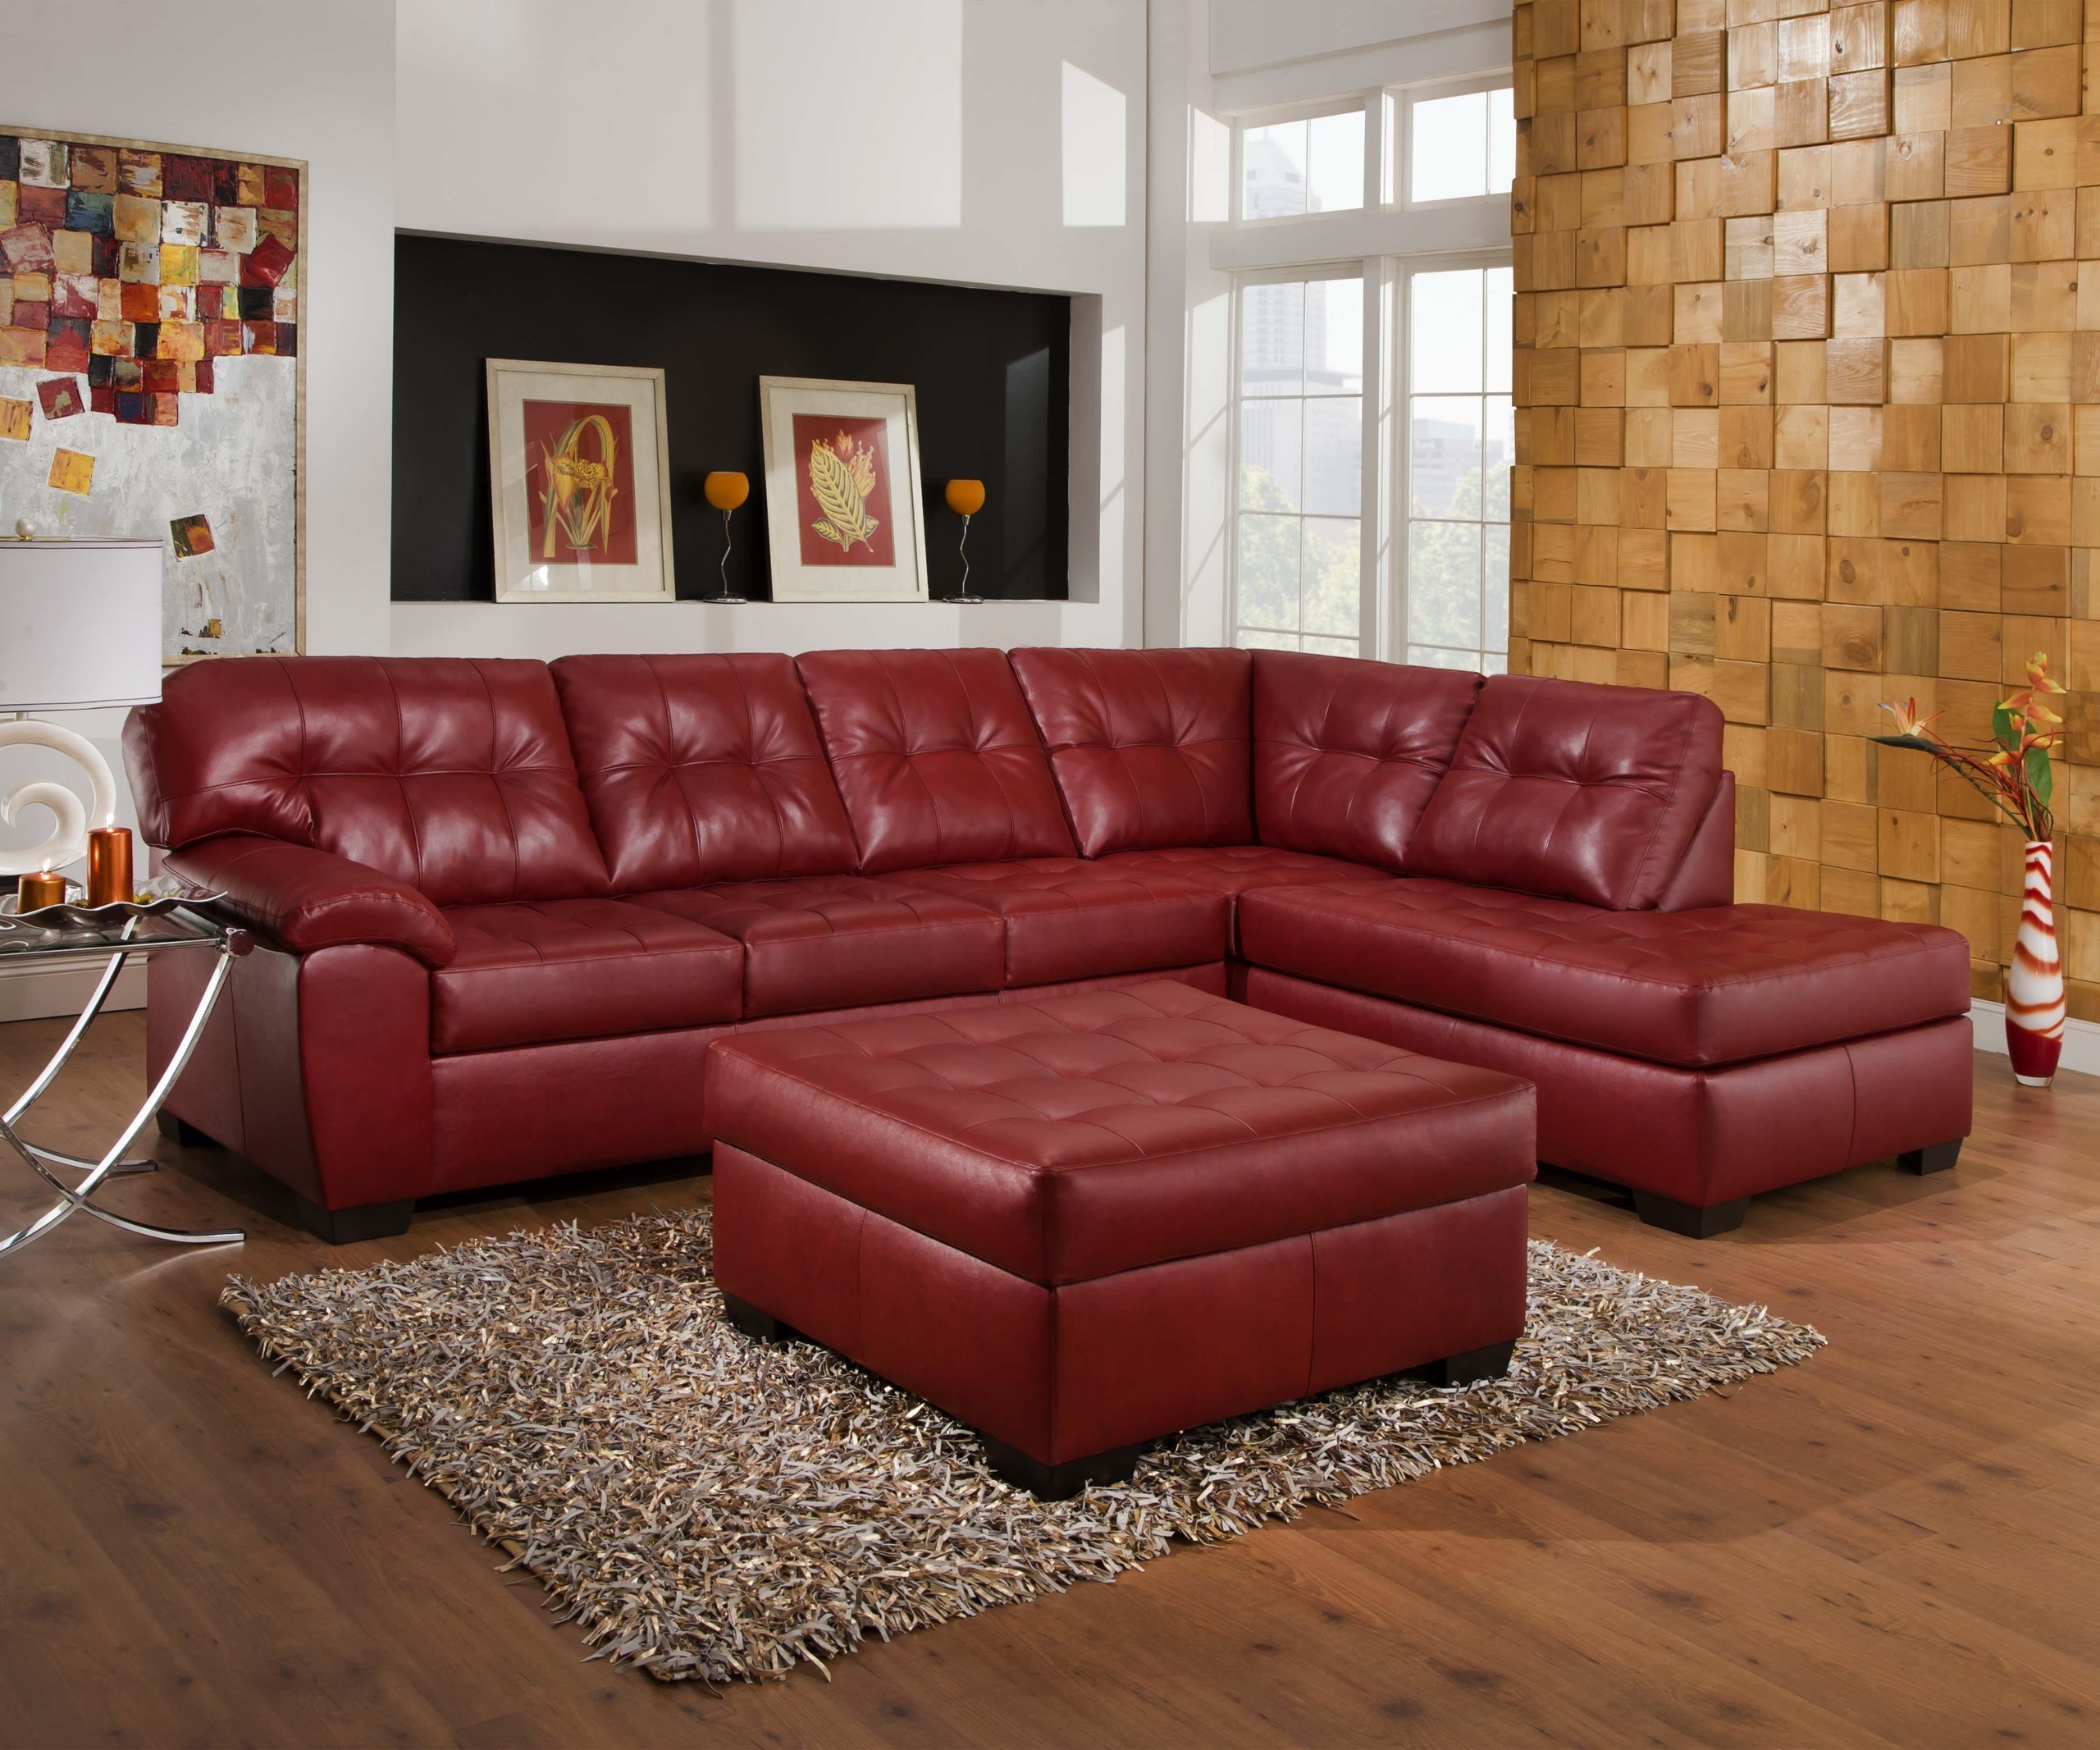 Simmons upholstery 9569 soho cardinal red sectional high point furniture